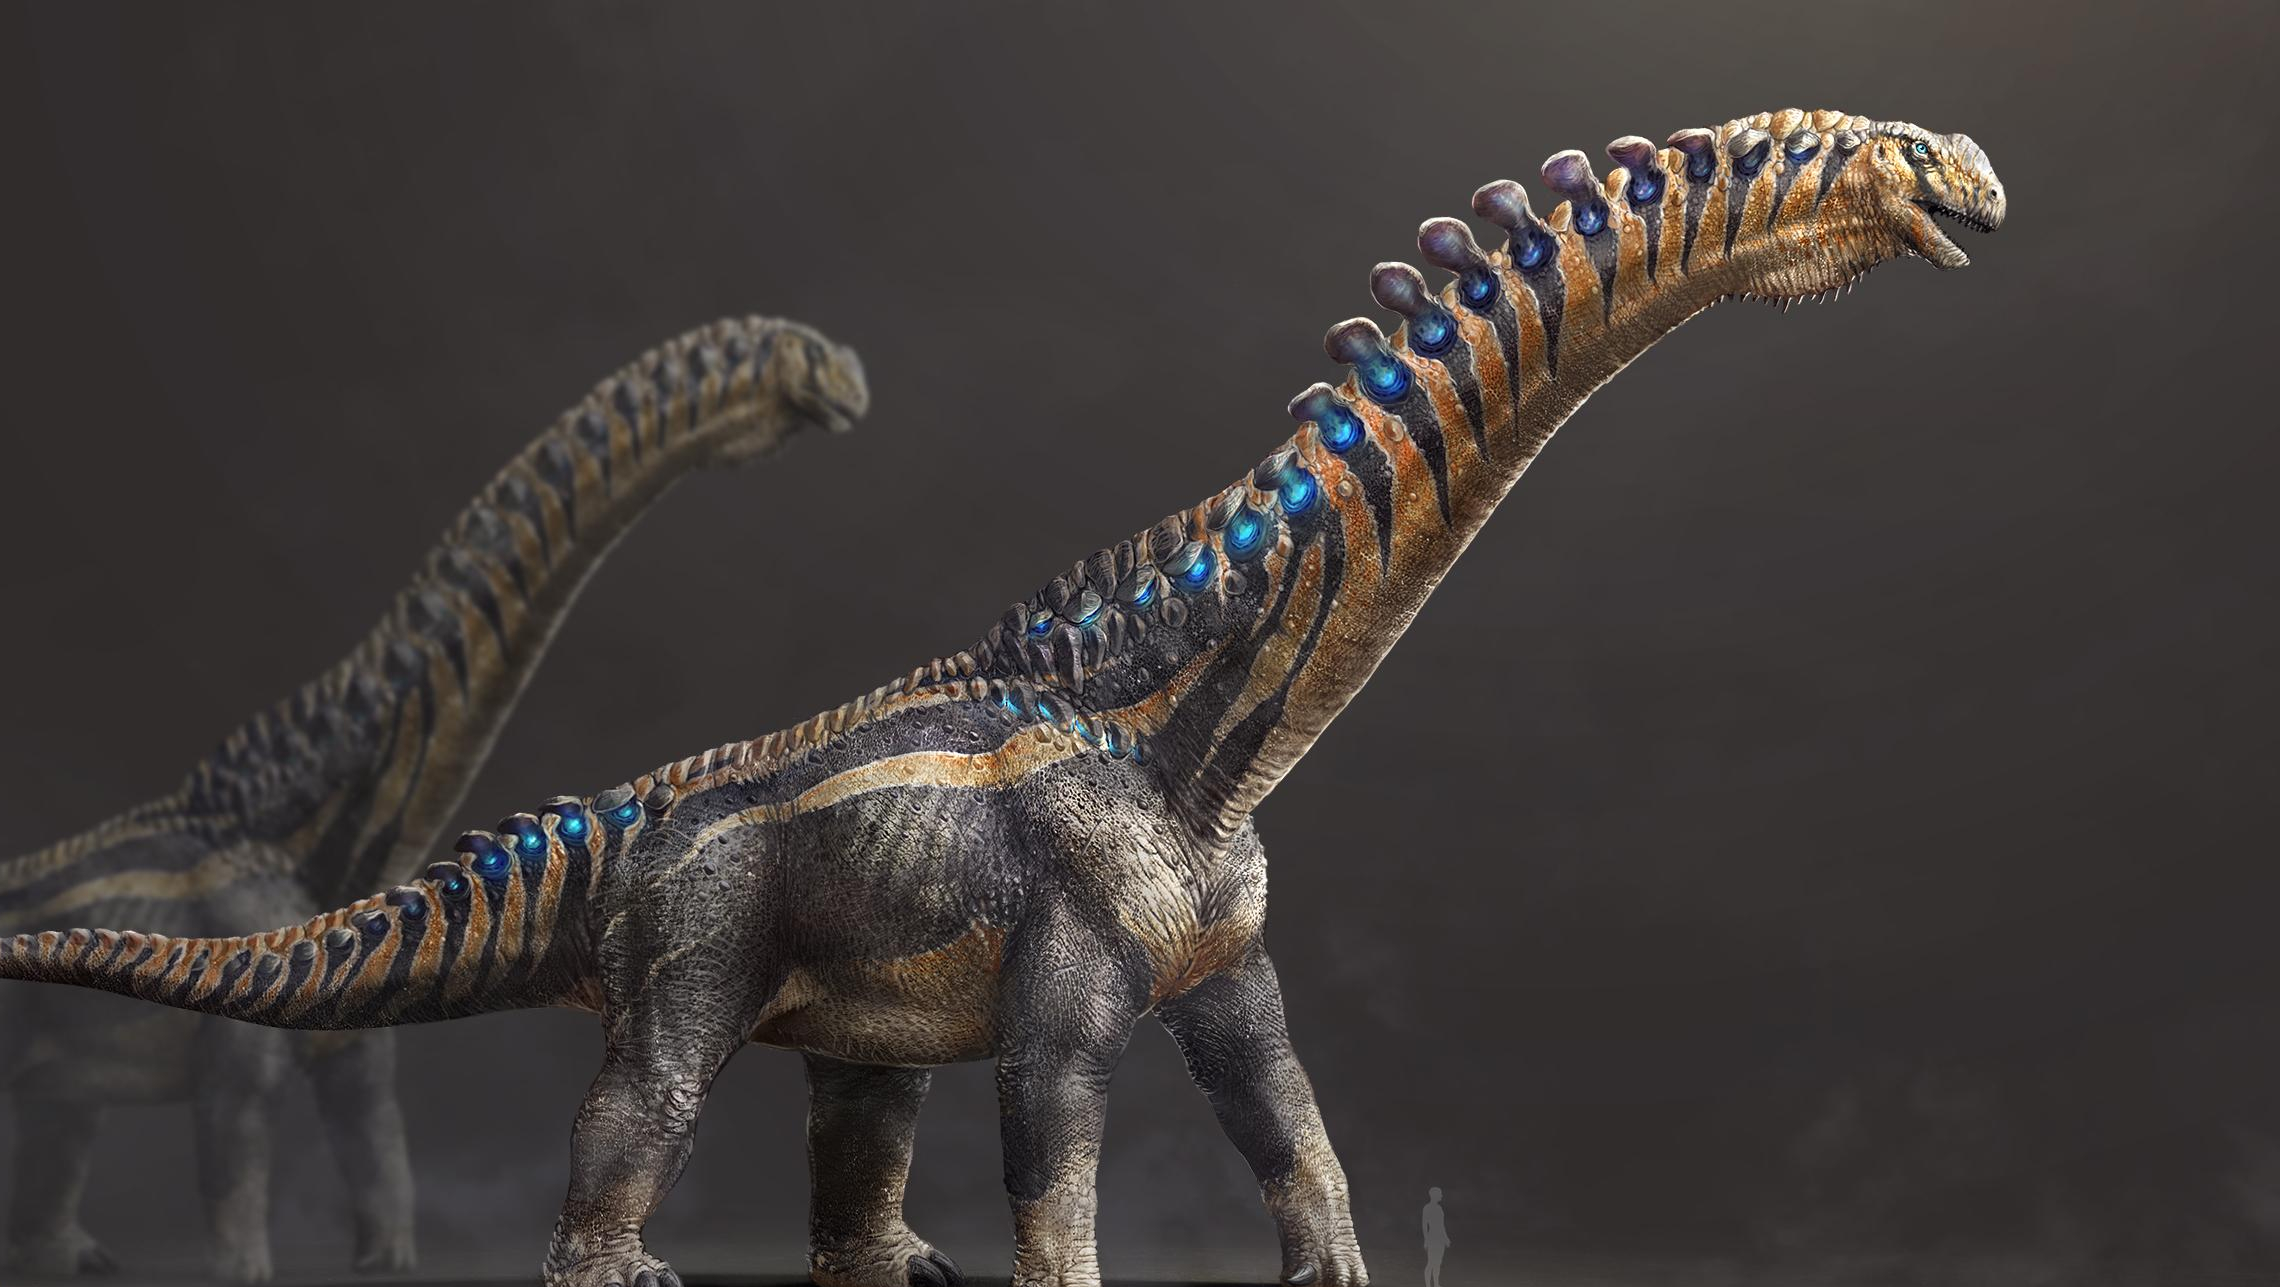 Concept art for the Dreadnoughtus, a new creature in Ark: Survival Ascended.